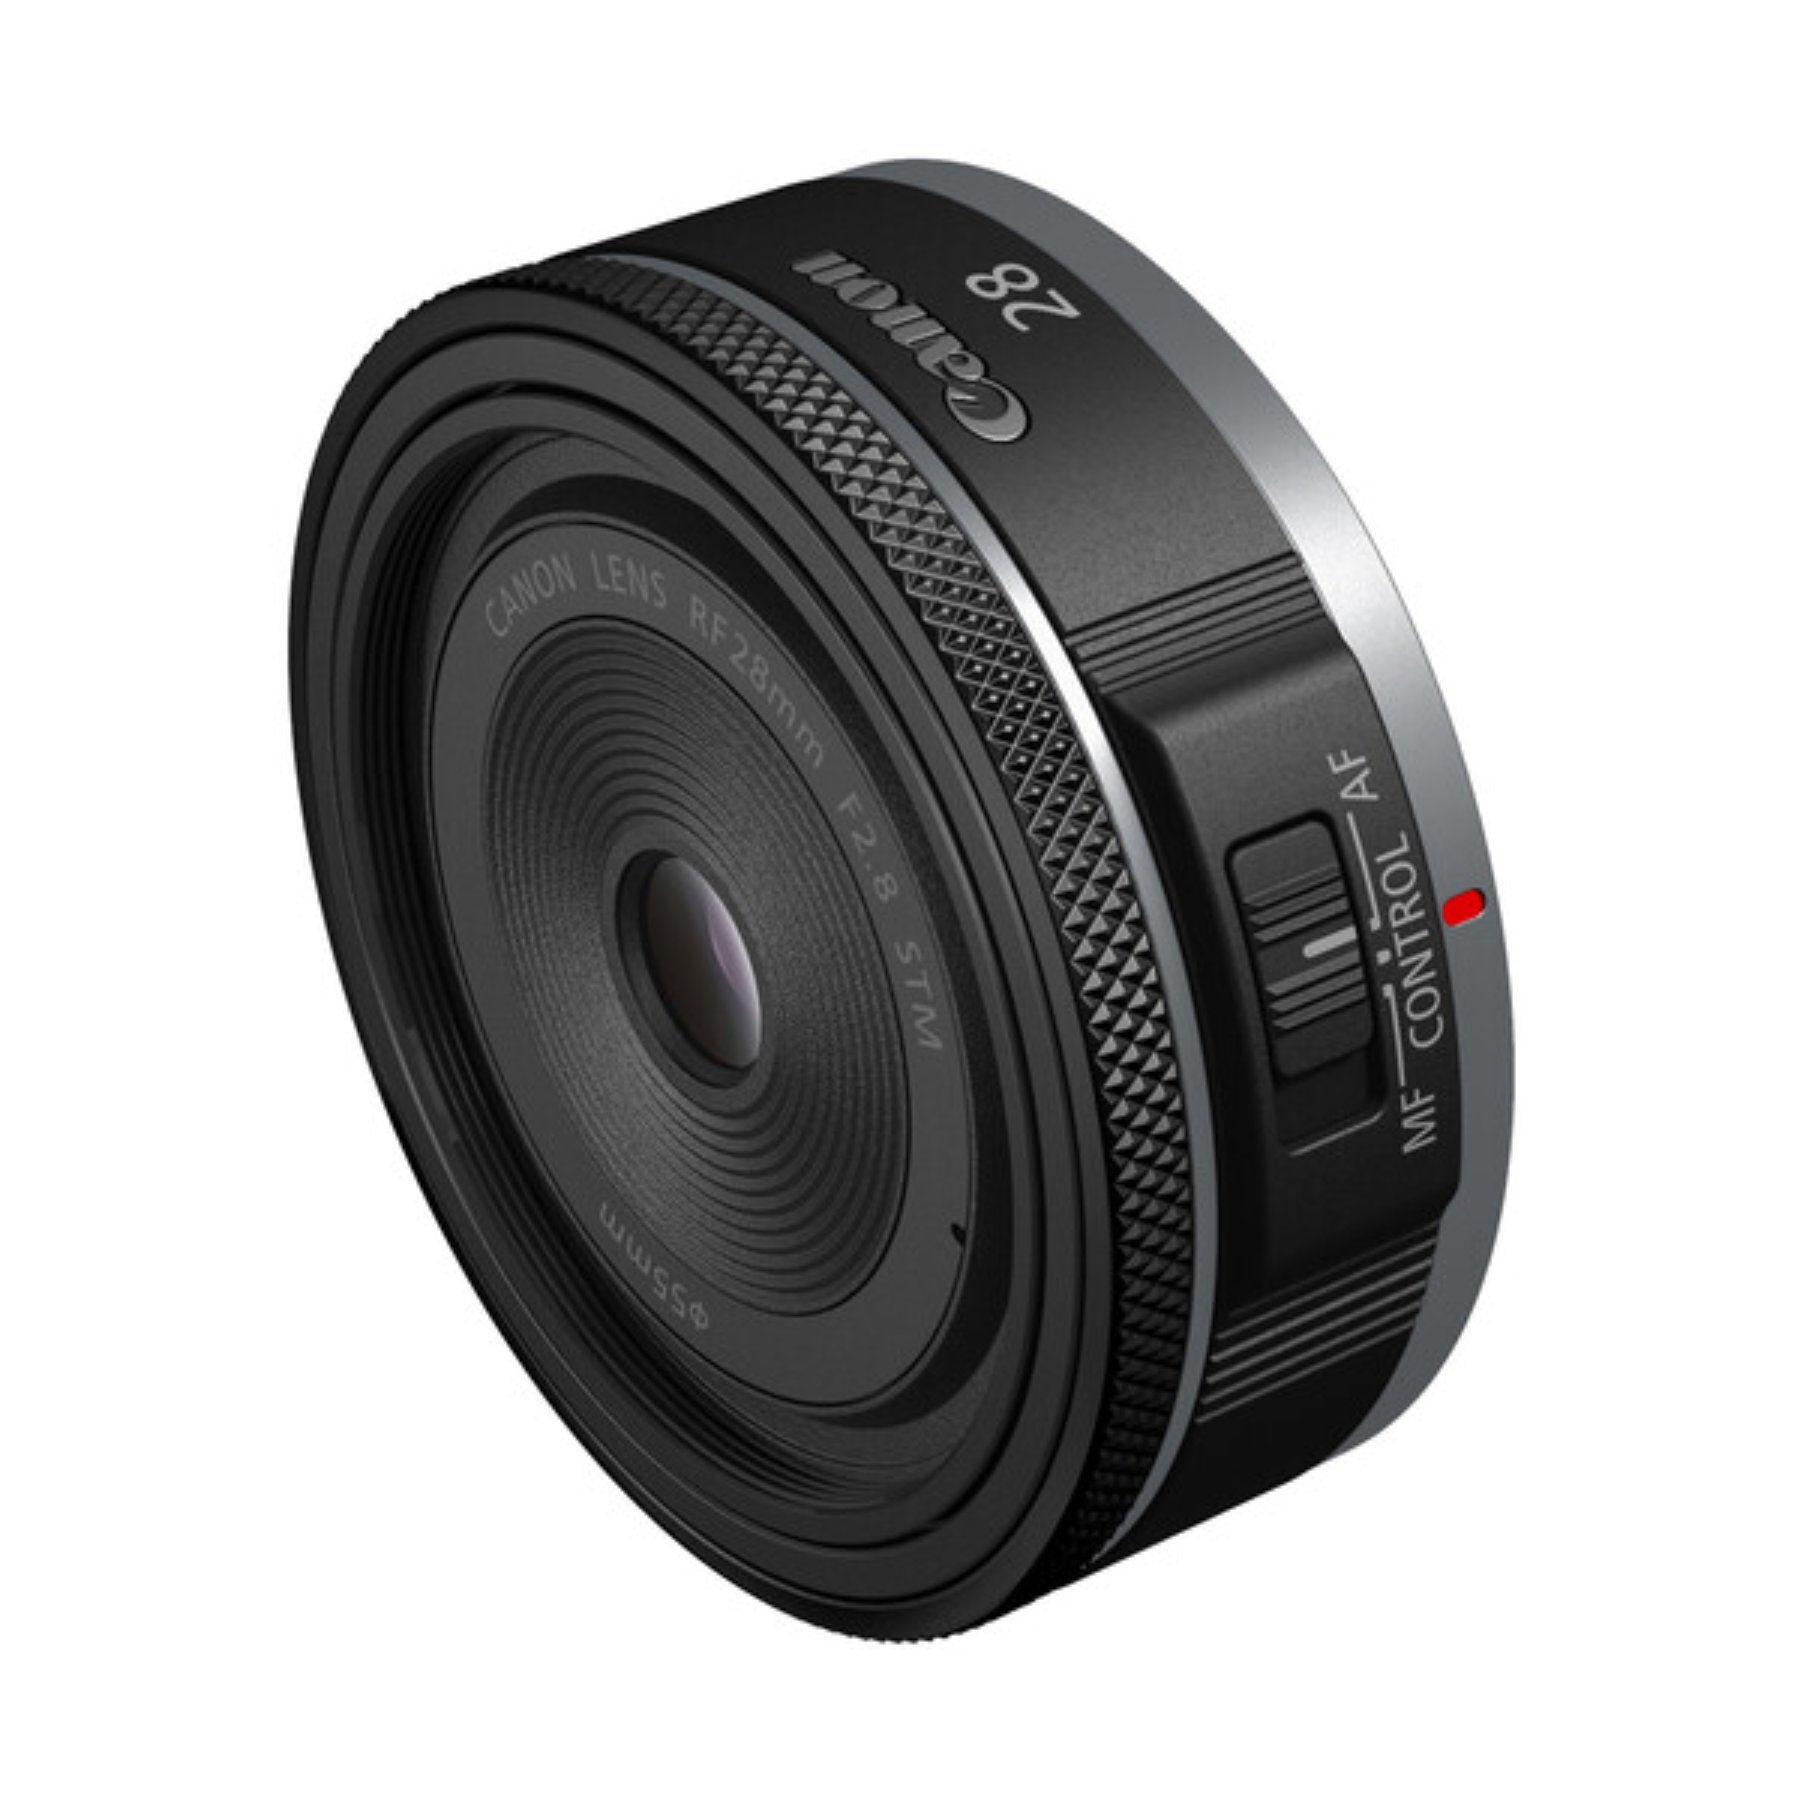 Buy Canon RF 28mm f/2.8 Pancake STM lens at Topic Store